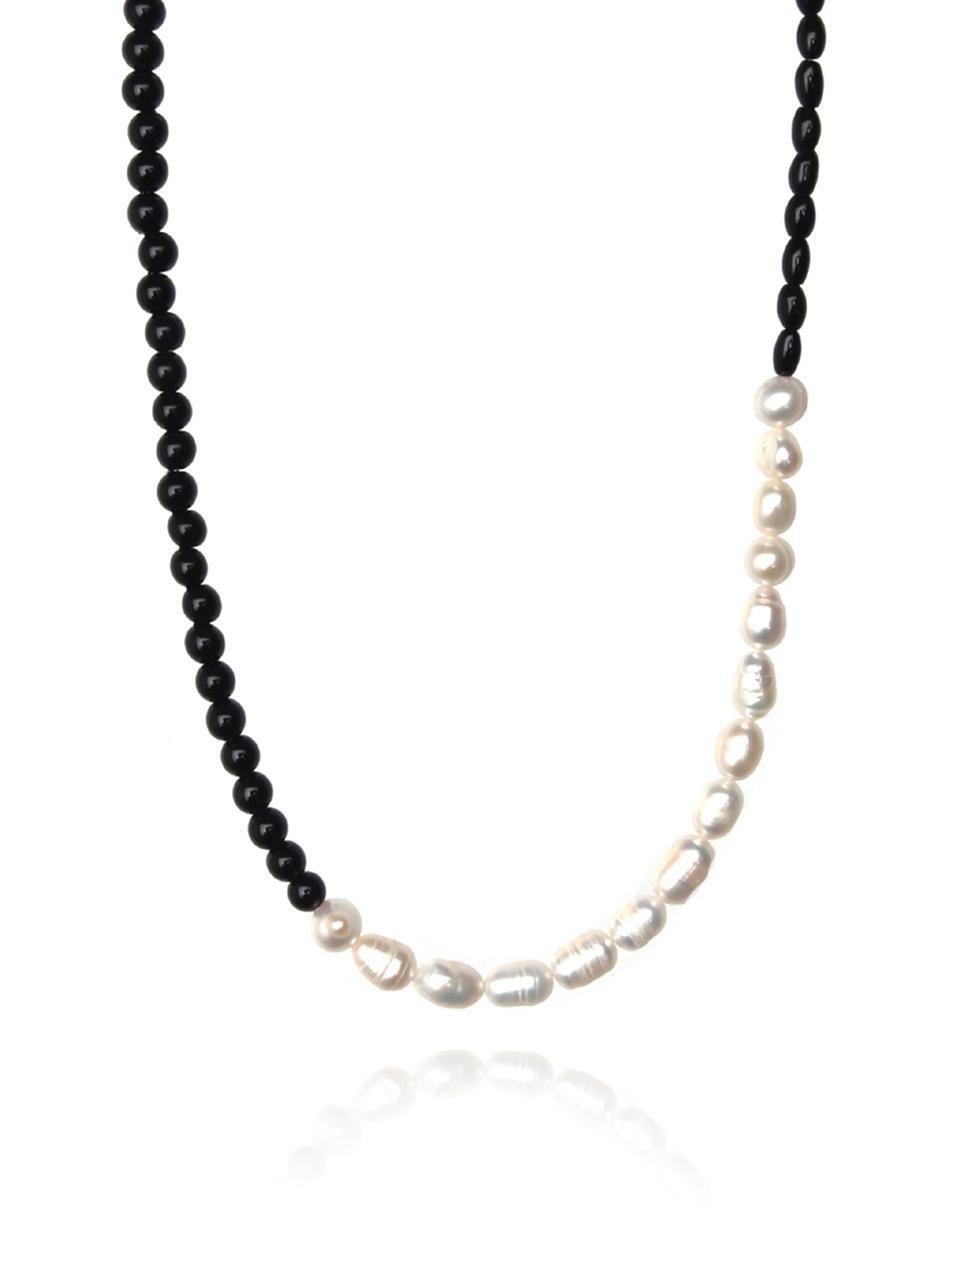 BA050 [Surgical steel] Black and white pearl necklace